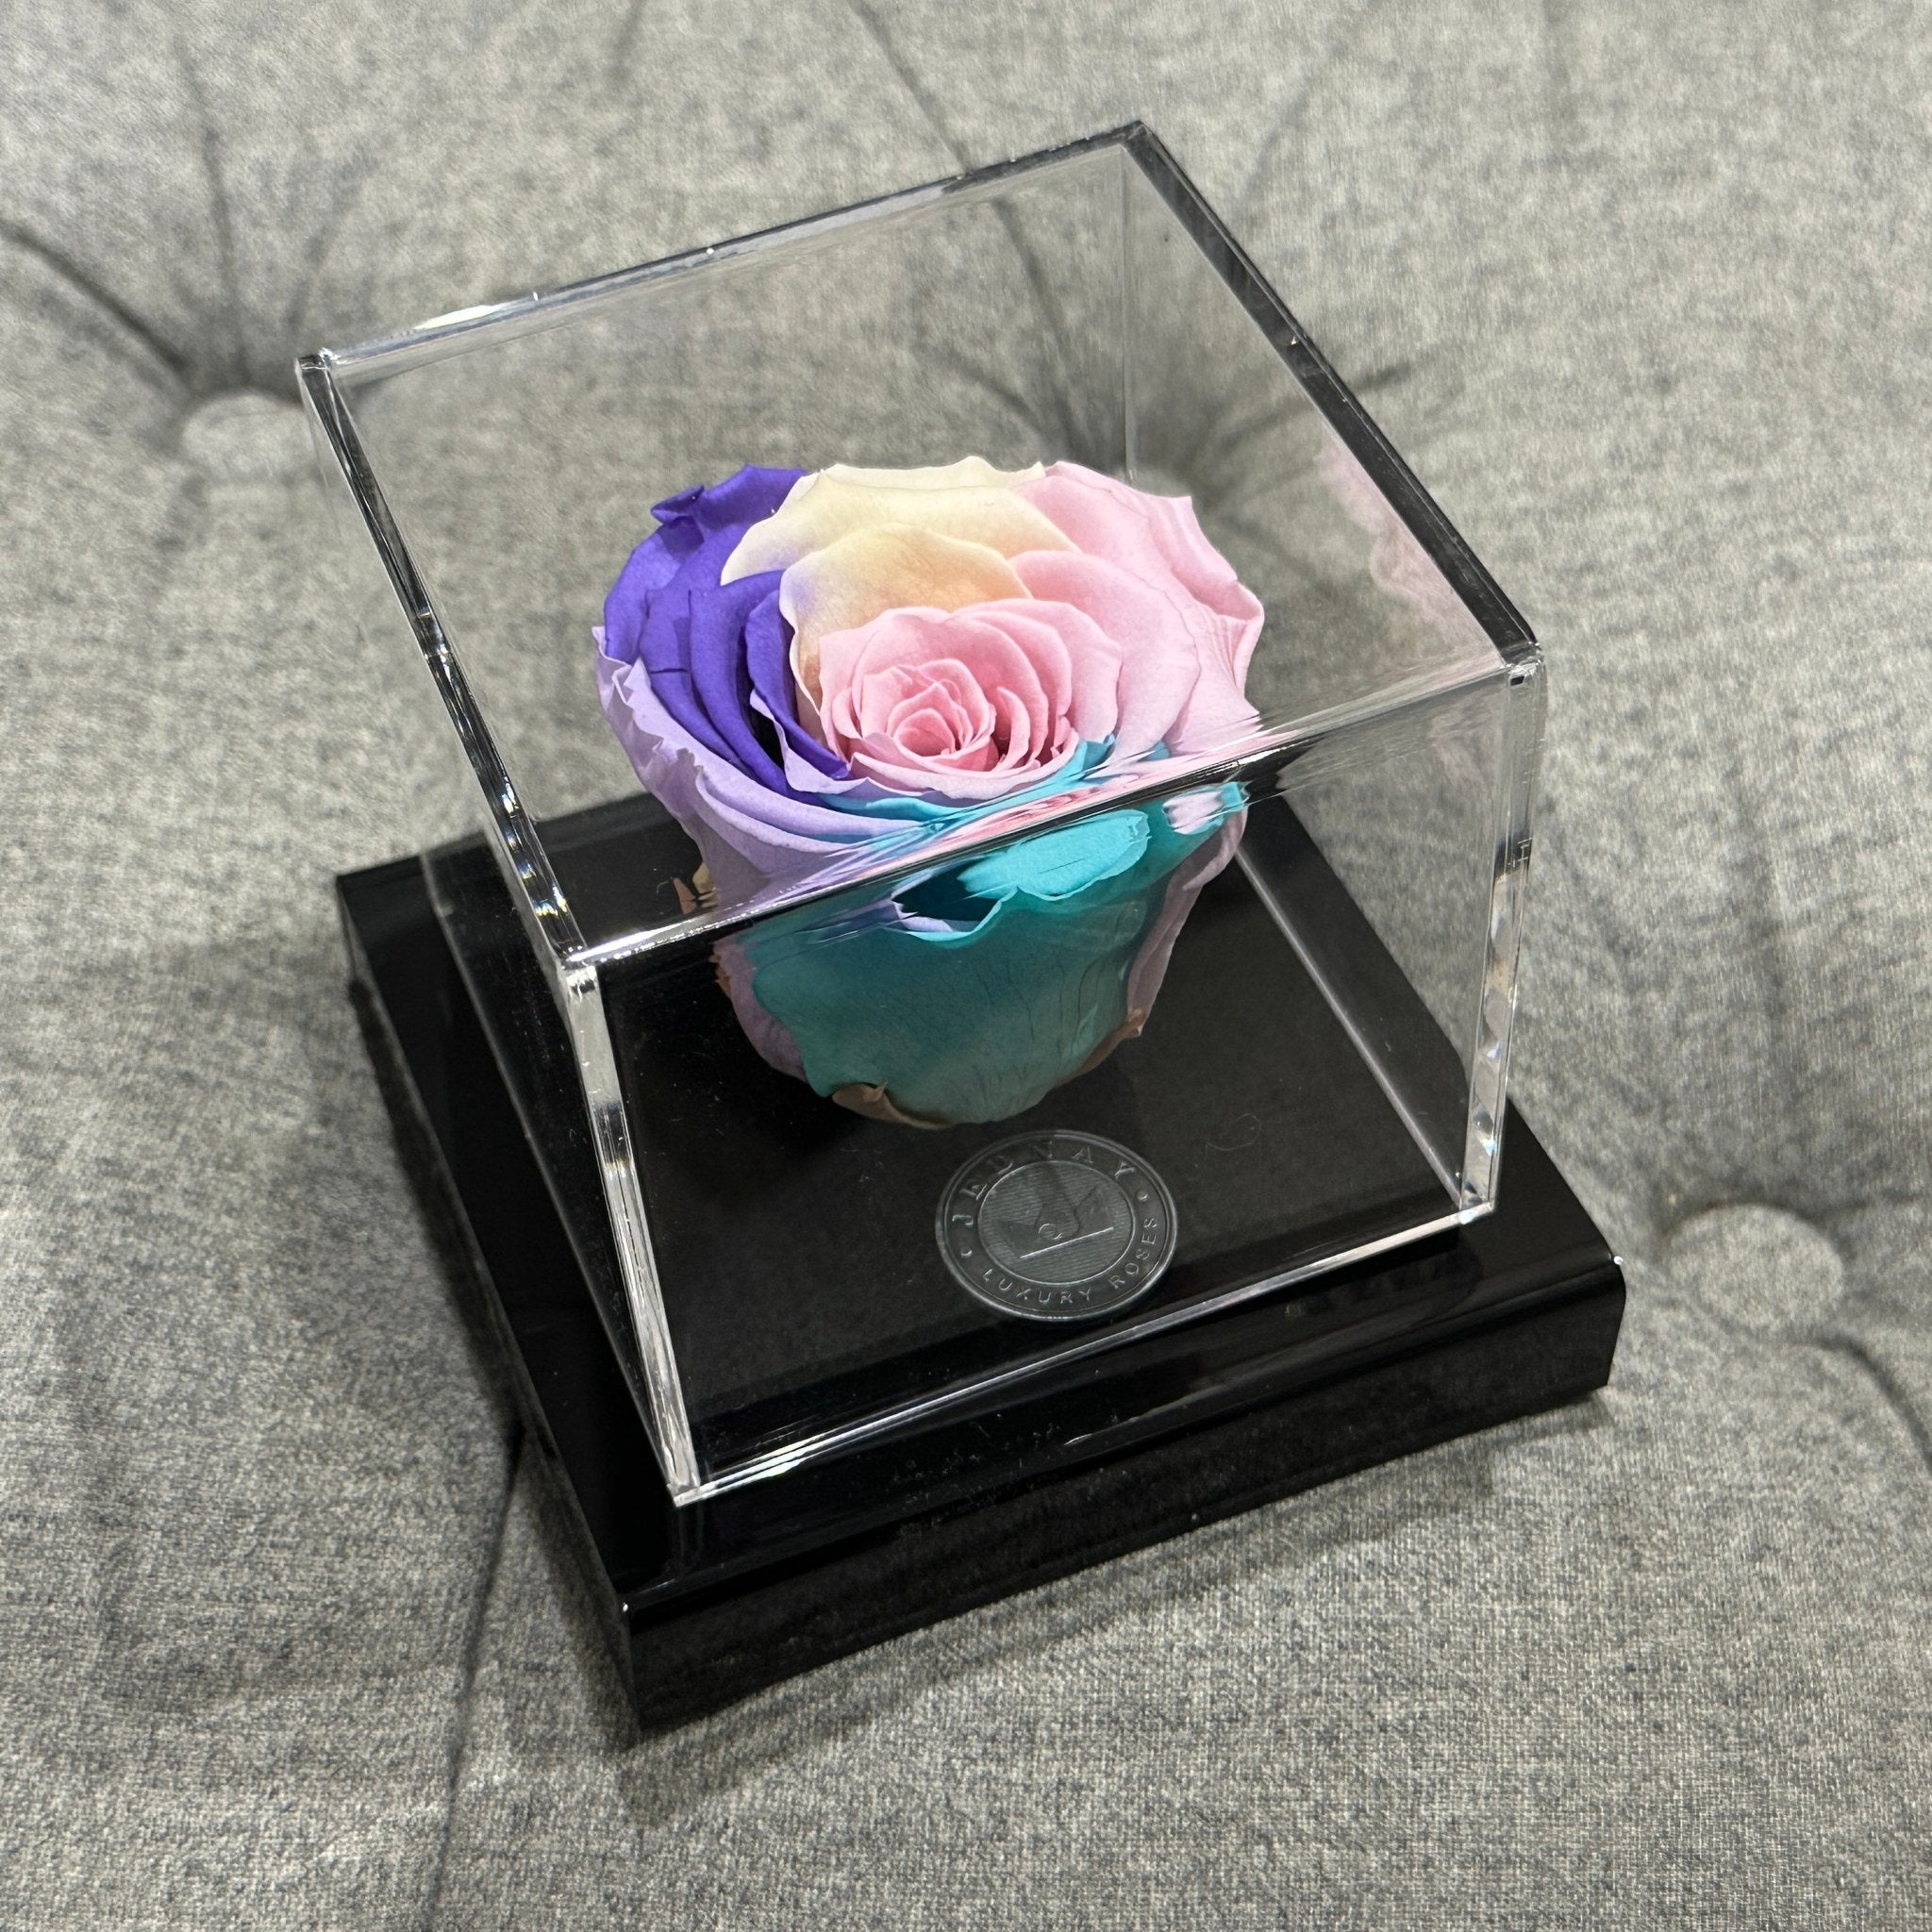 The Clarity Deluxe | Over The Rainbow Eternal Rose - Jednay Roses